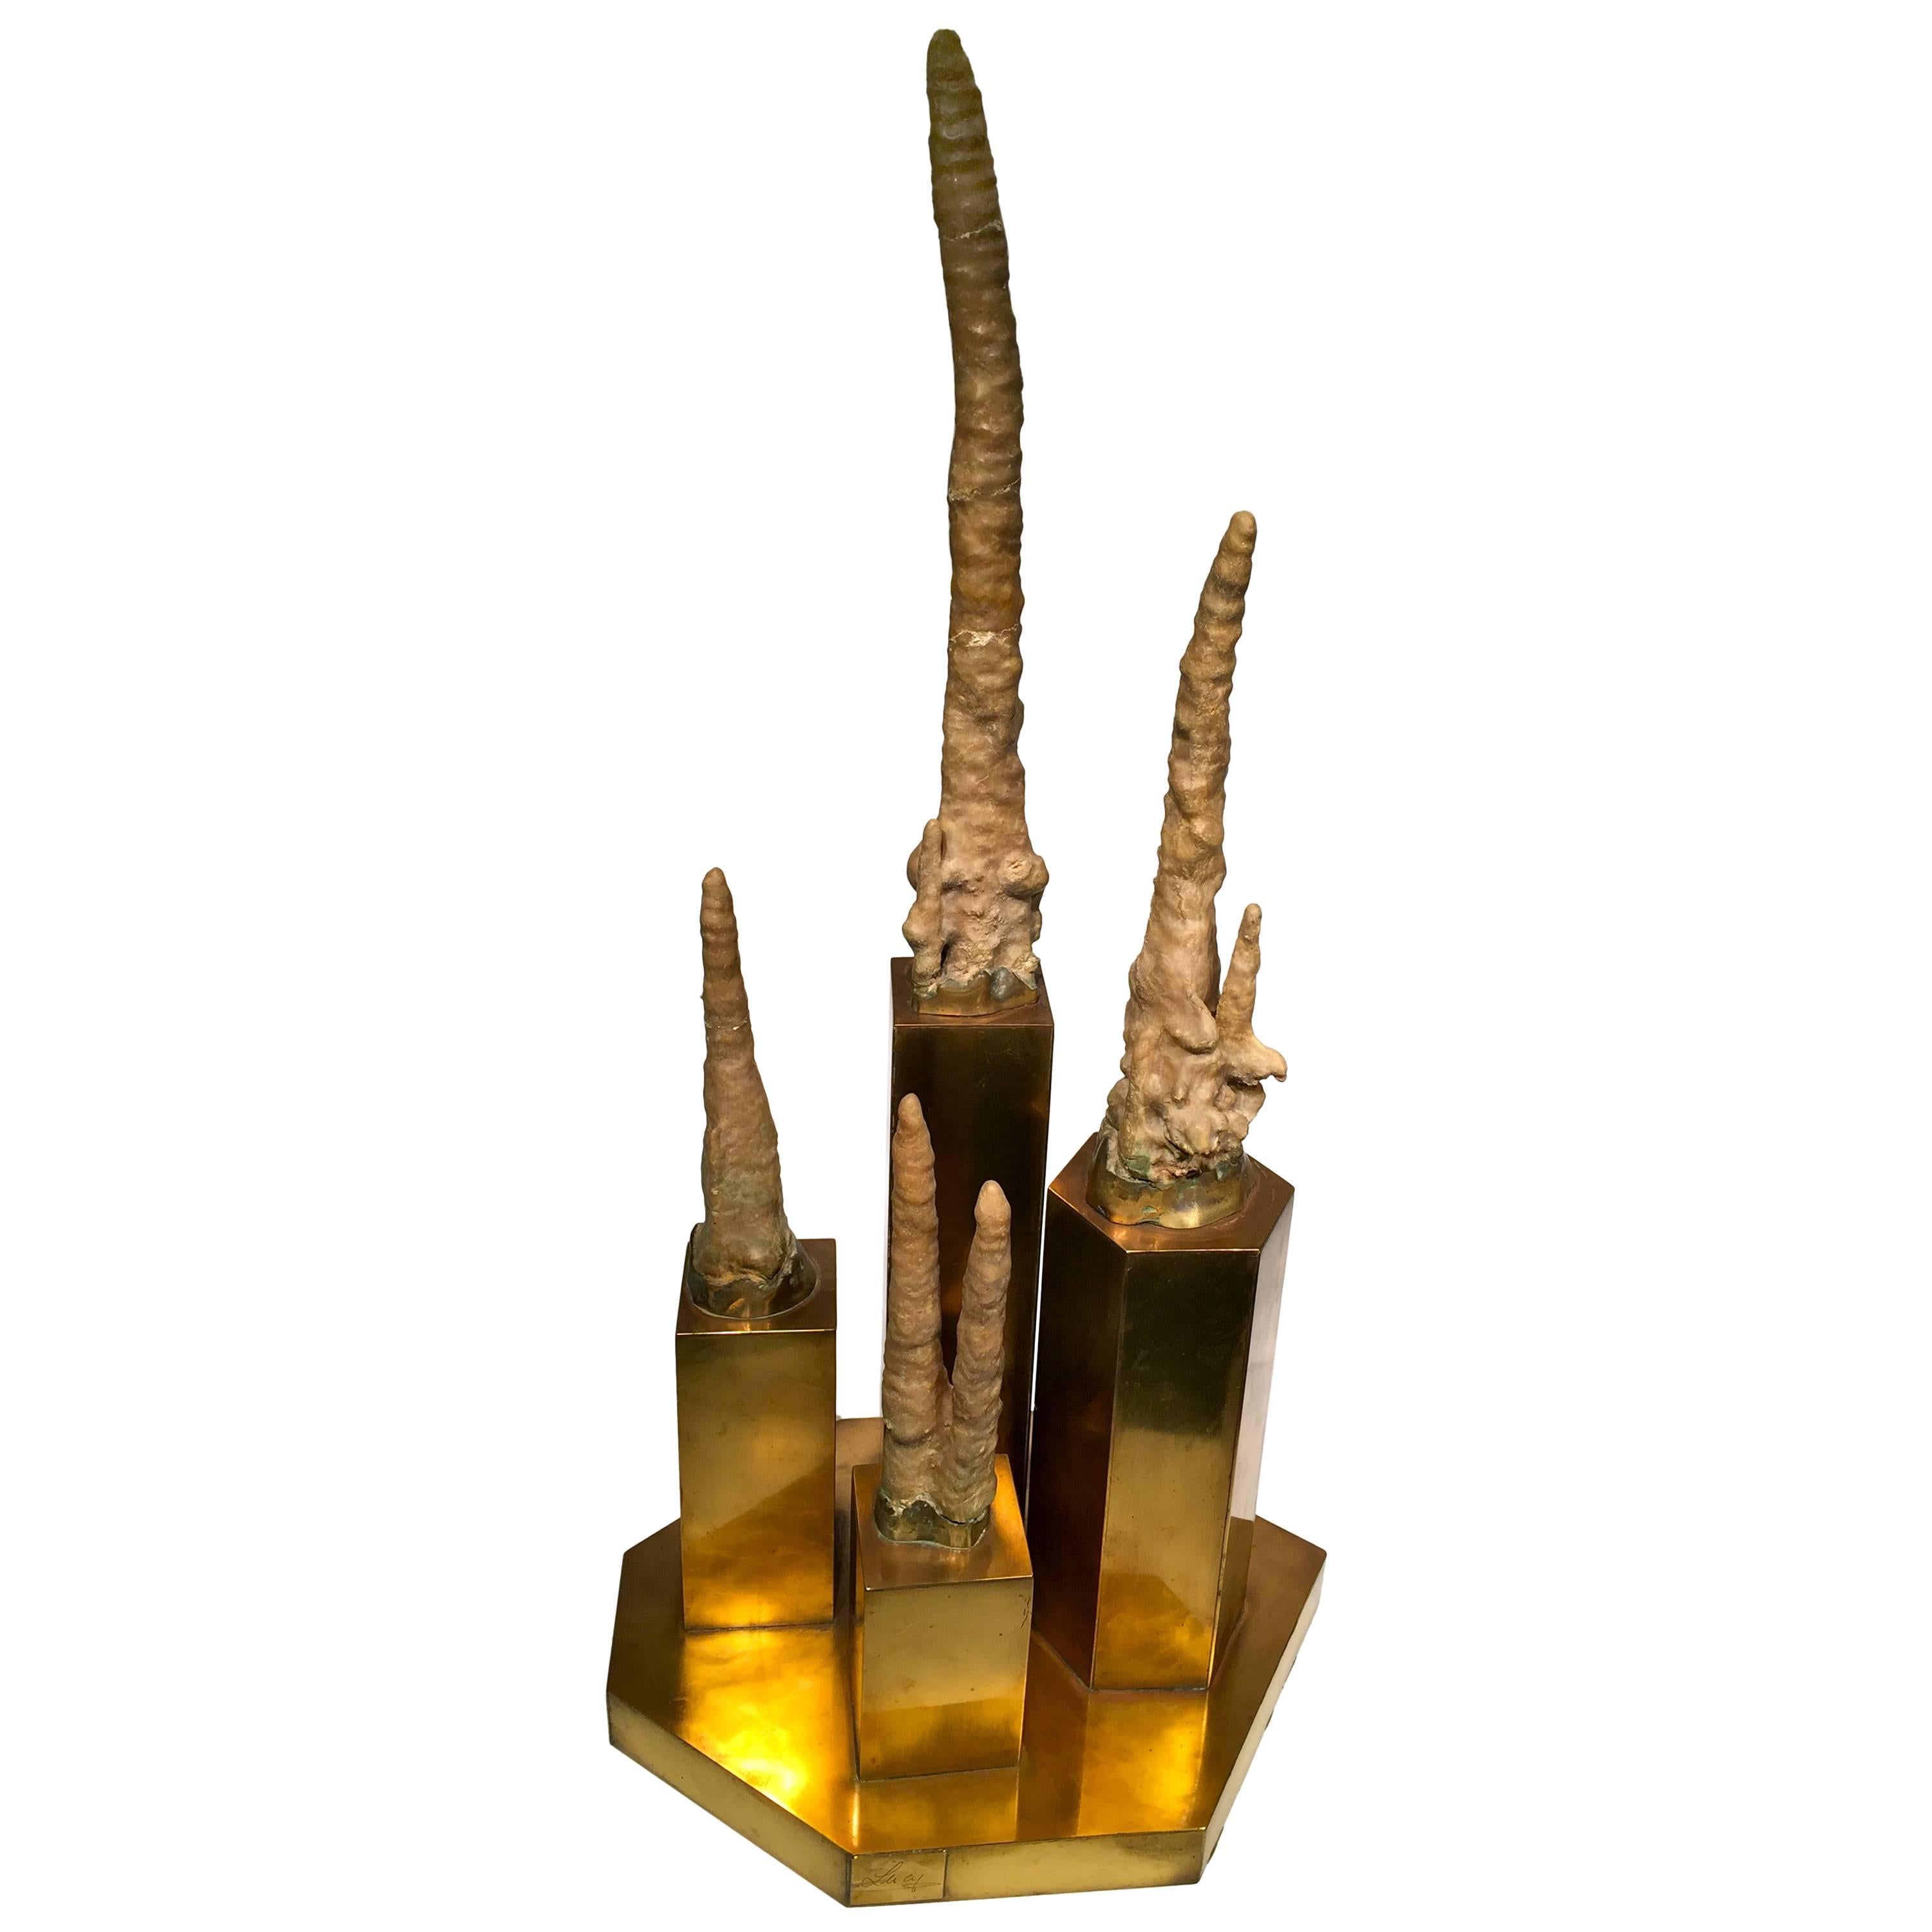 LUCY BLOCH Brazil Sculpture with Stalagmites and Bronze "Cave", circa 1970 For Sale